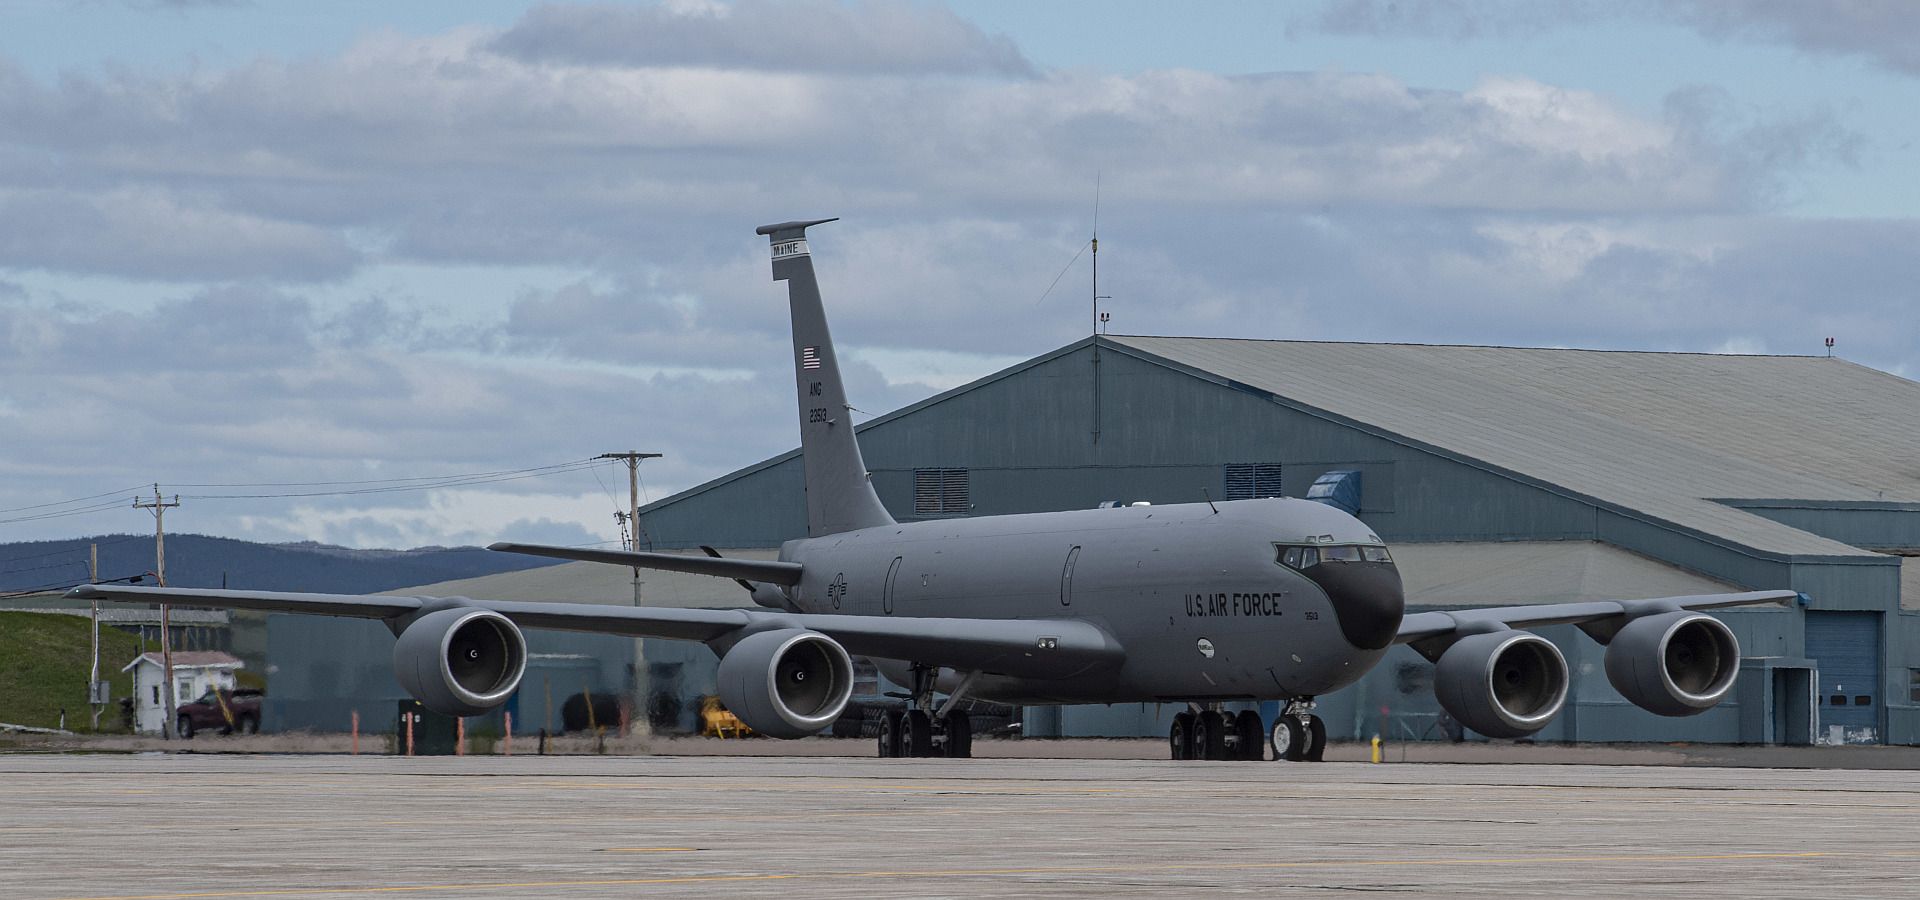 135R Statotanker Aircraft Of The Maine Air National Guard From The 101st Air Refueling Wing Bangor Maine